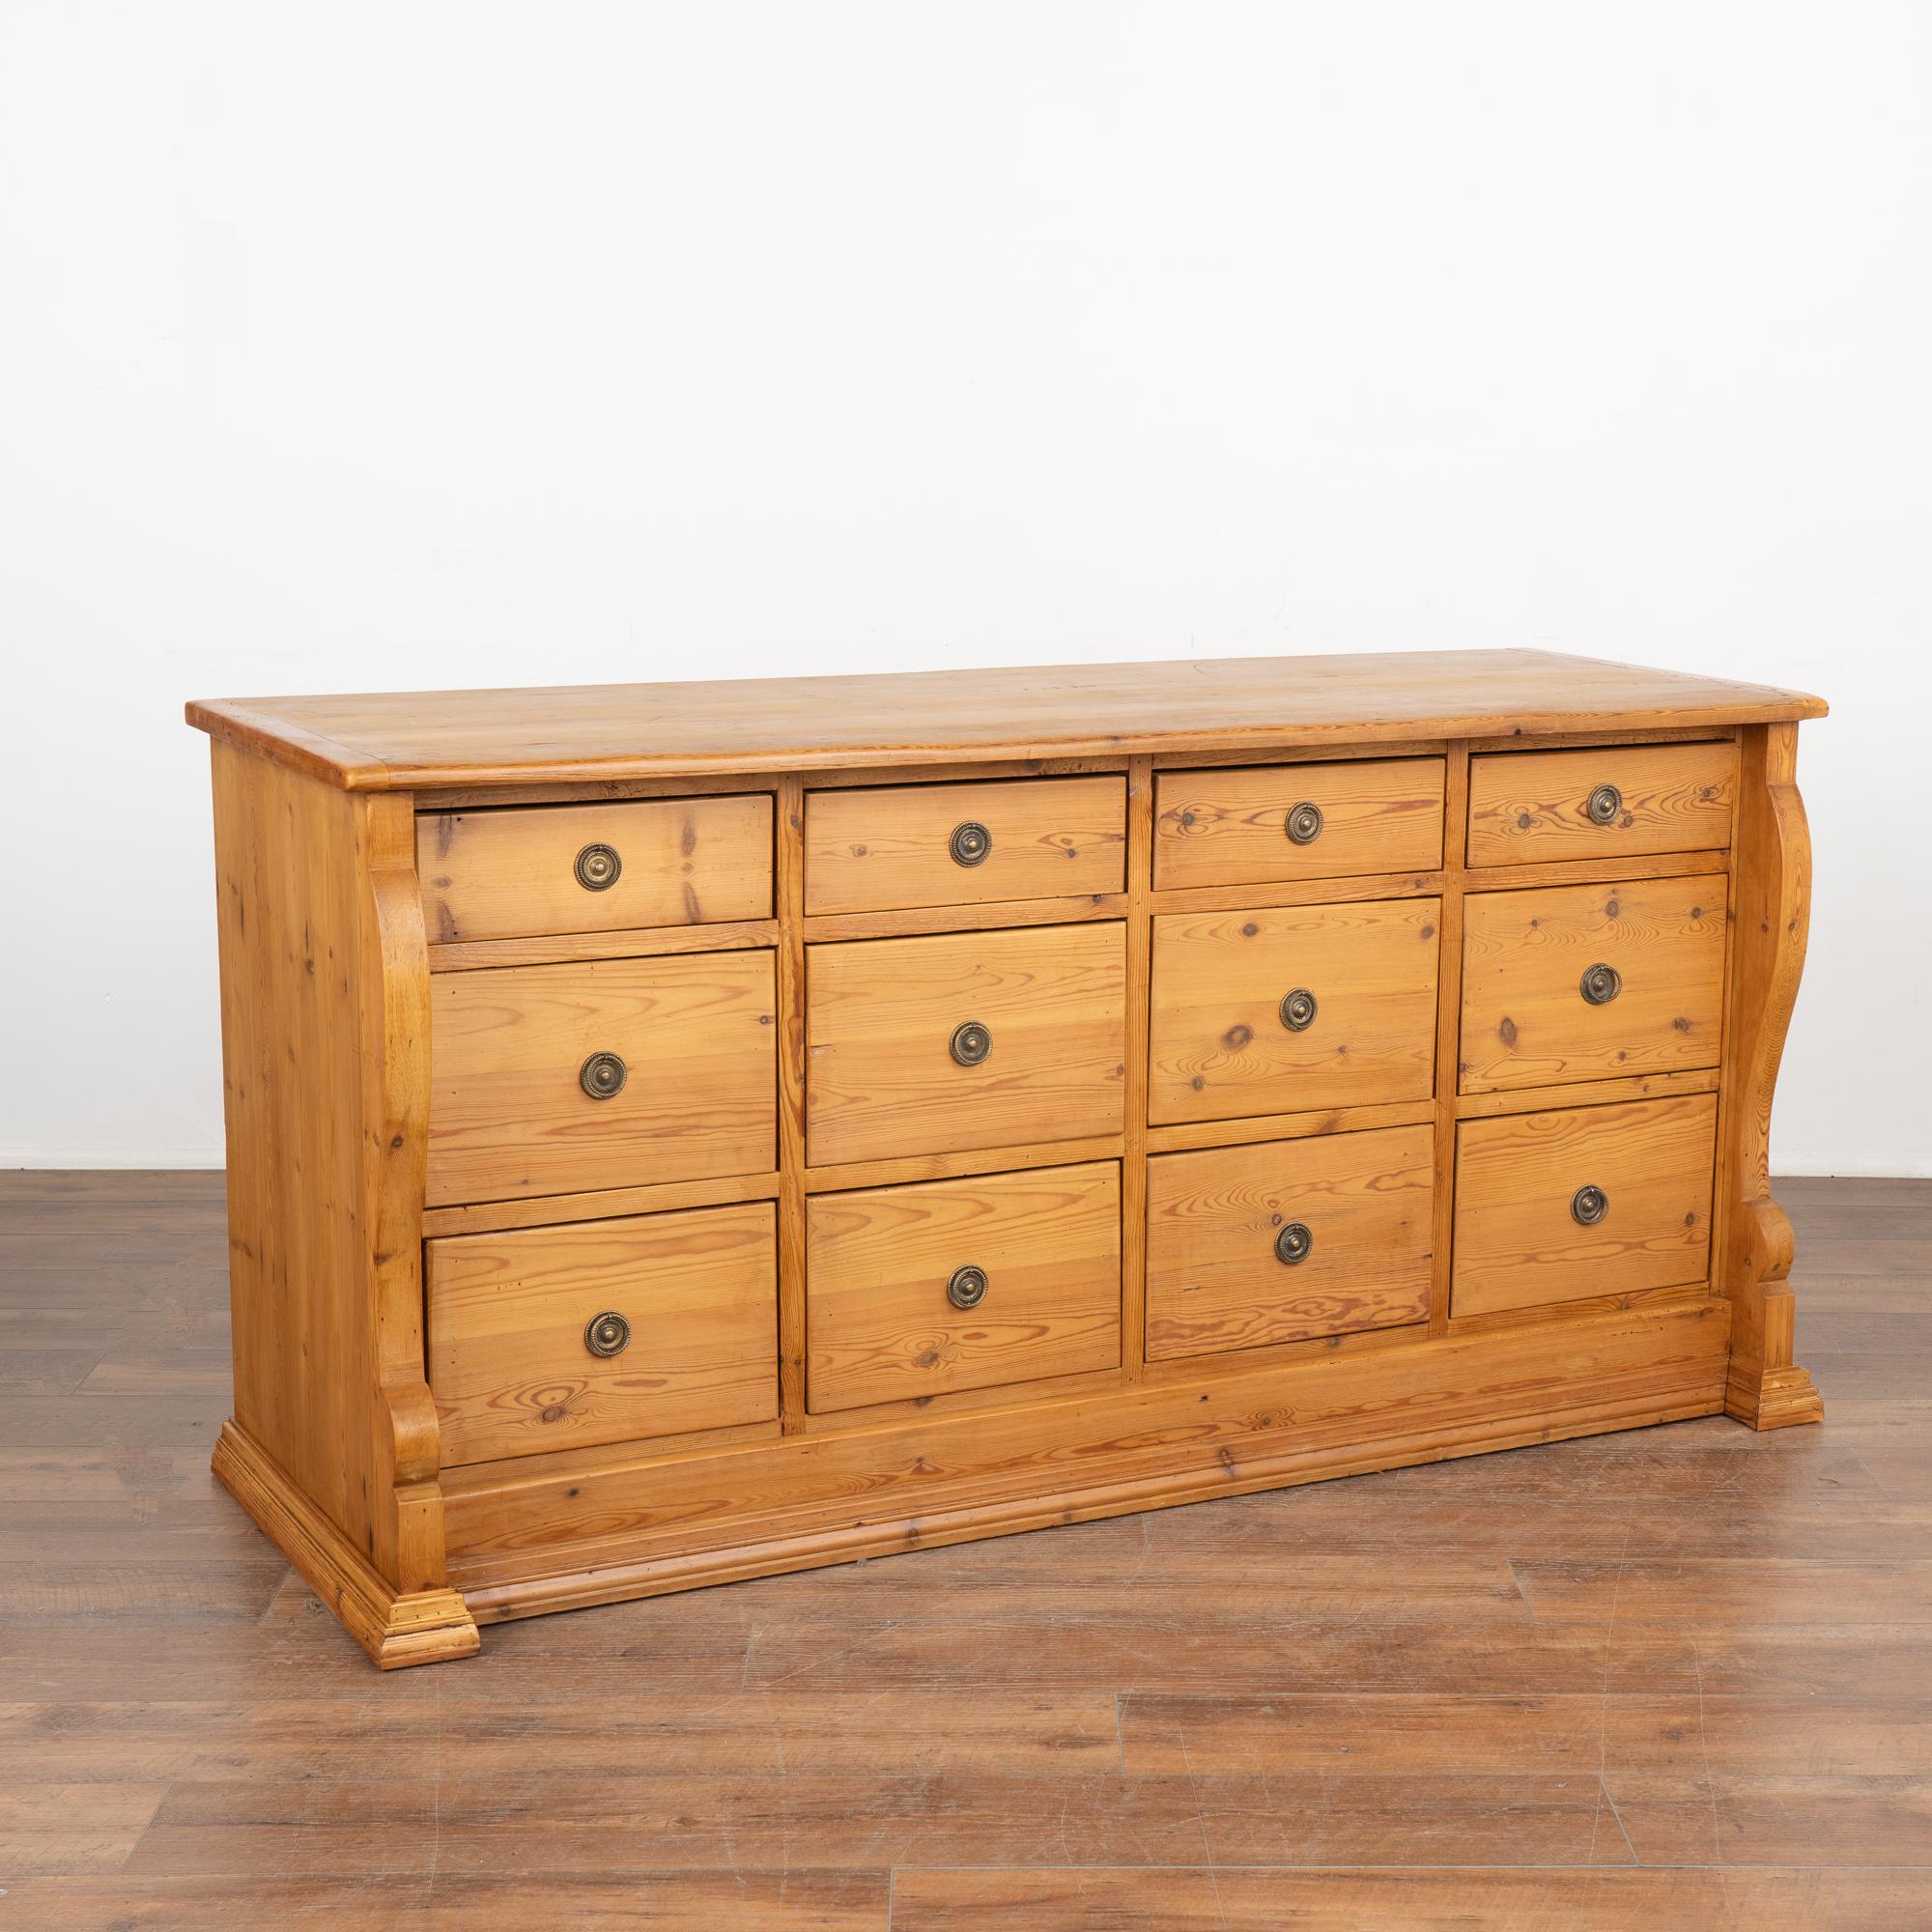 Fun and function combine in this pine chest of 12 drawers. This delightful pine apothecary originally served as a shop counter or storage cabinet. Counters similar to this were used throughout shops in European and are a great way to incorporate old